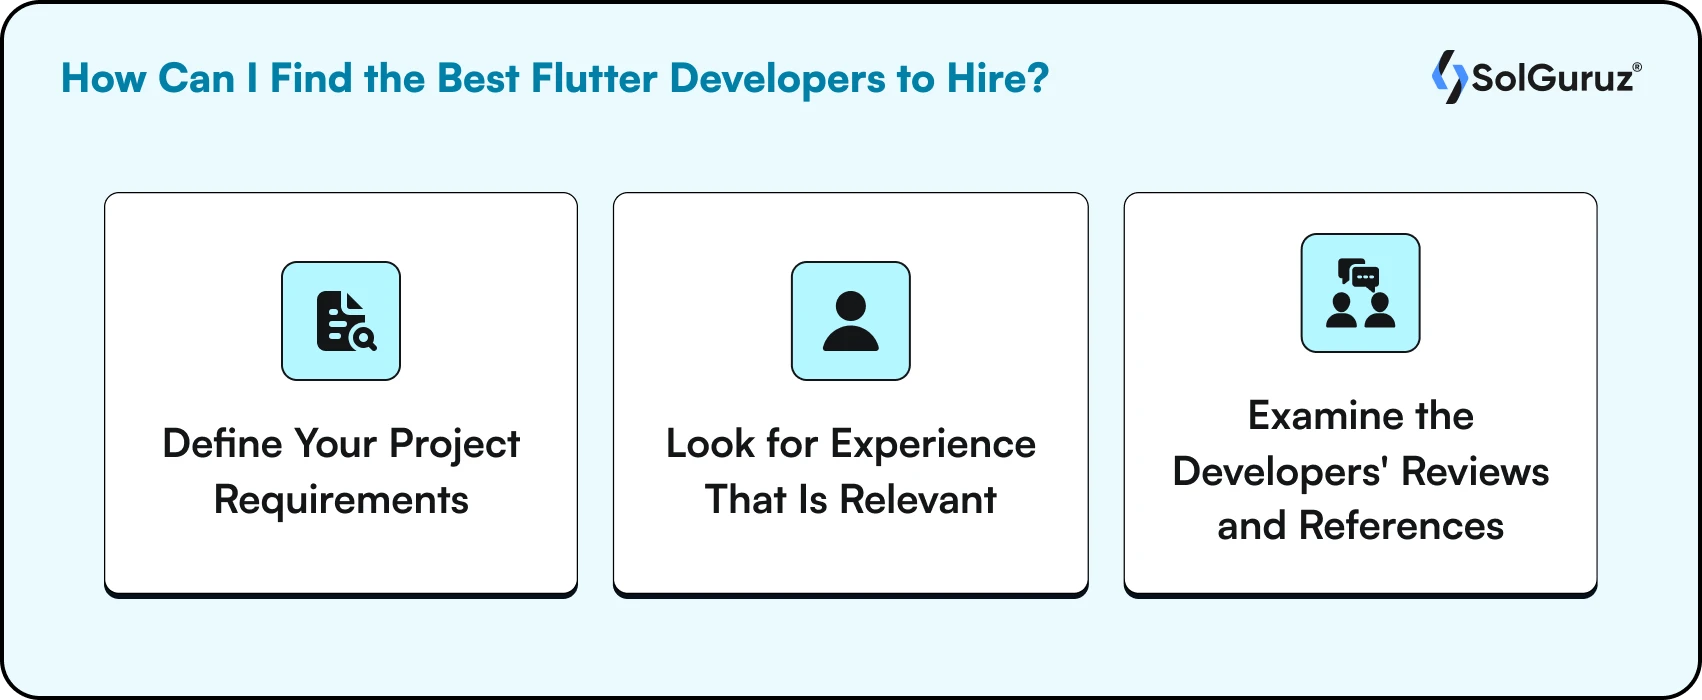 How Can I Find the Best Flutter Developers to Hire